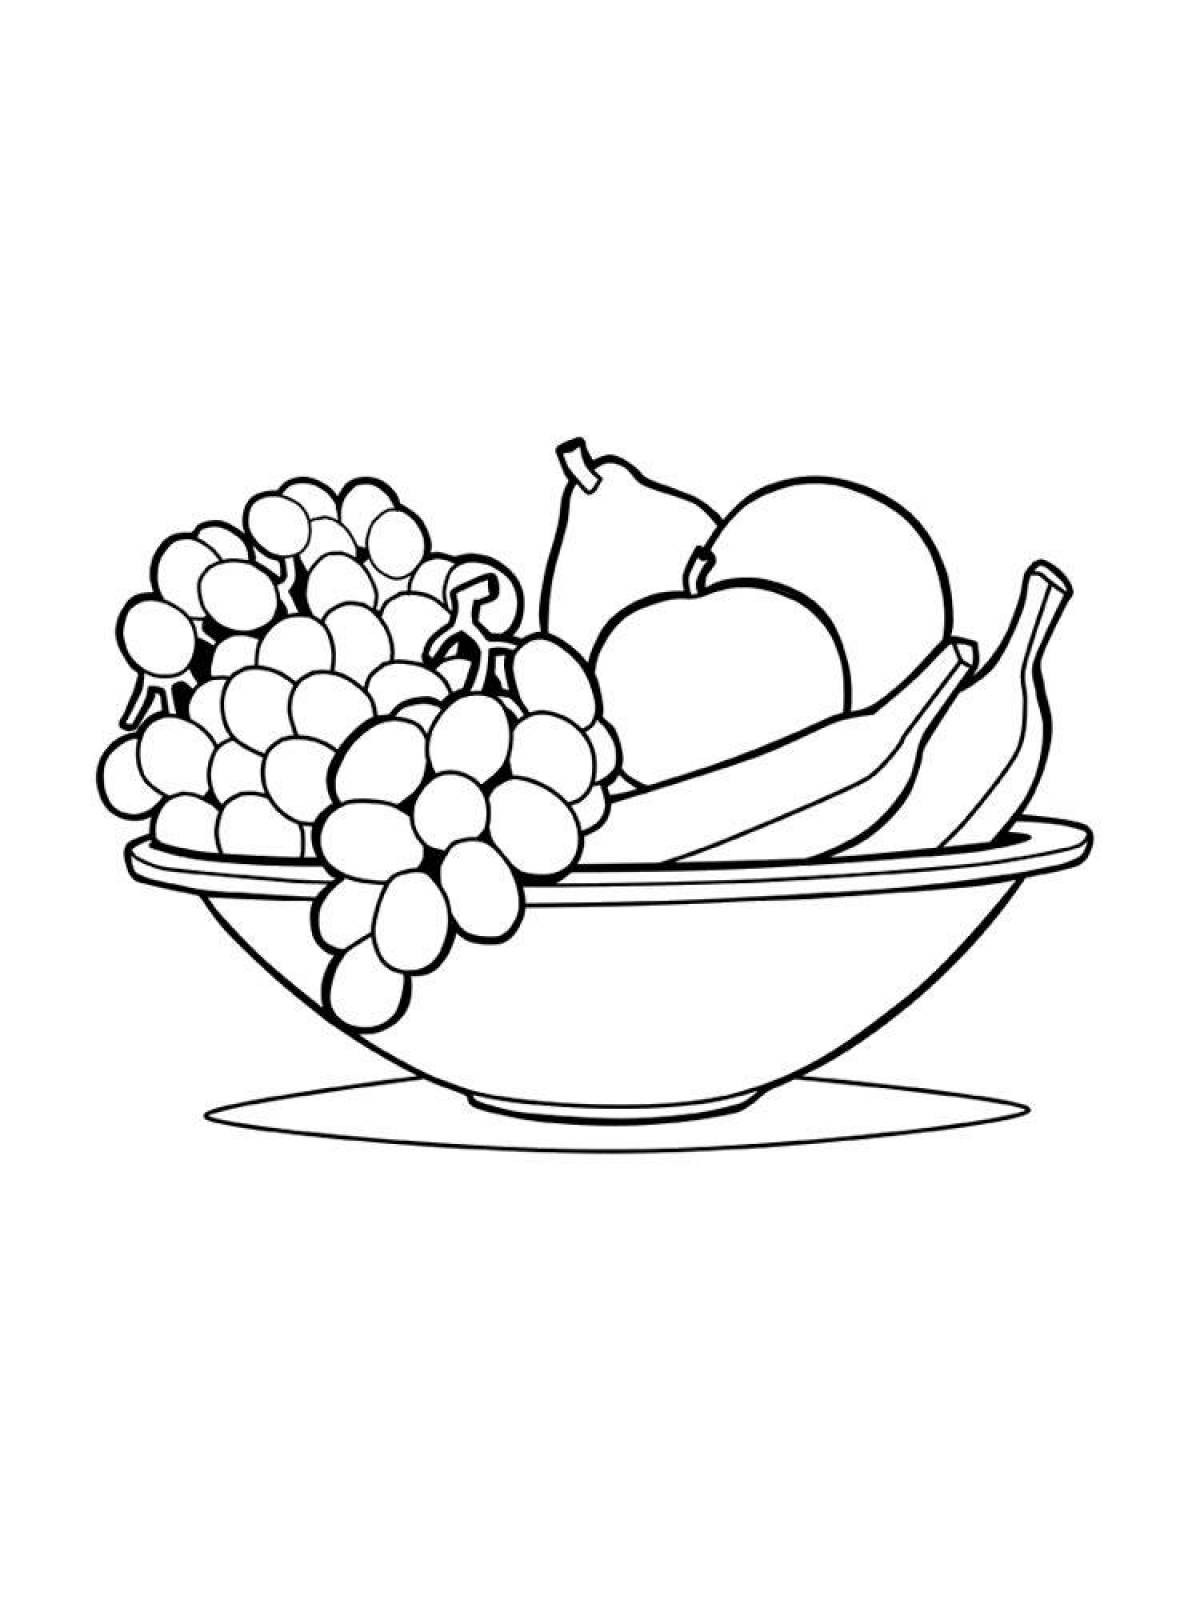 Playful still life coloring page for kids